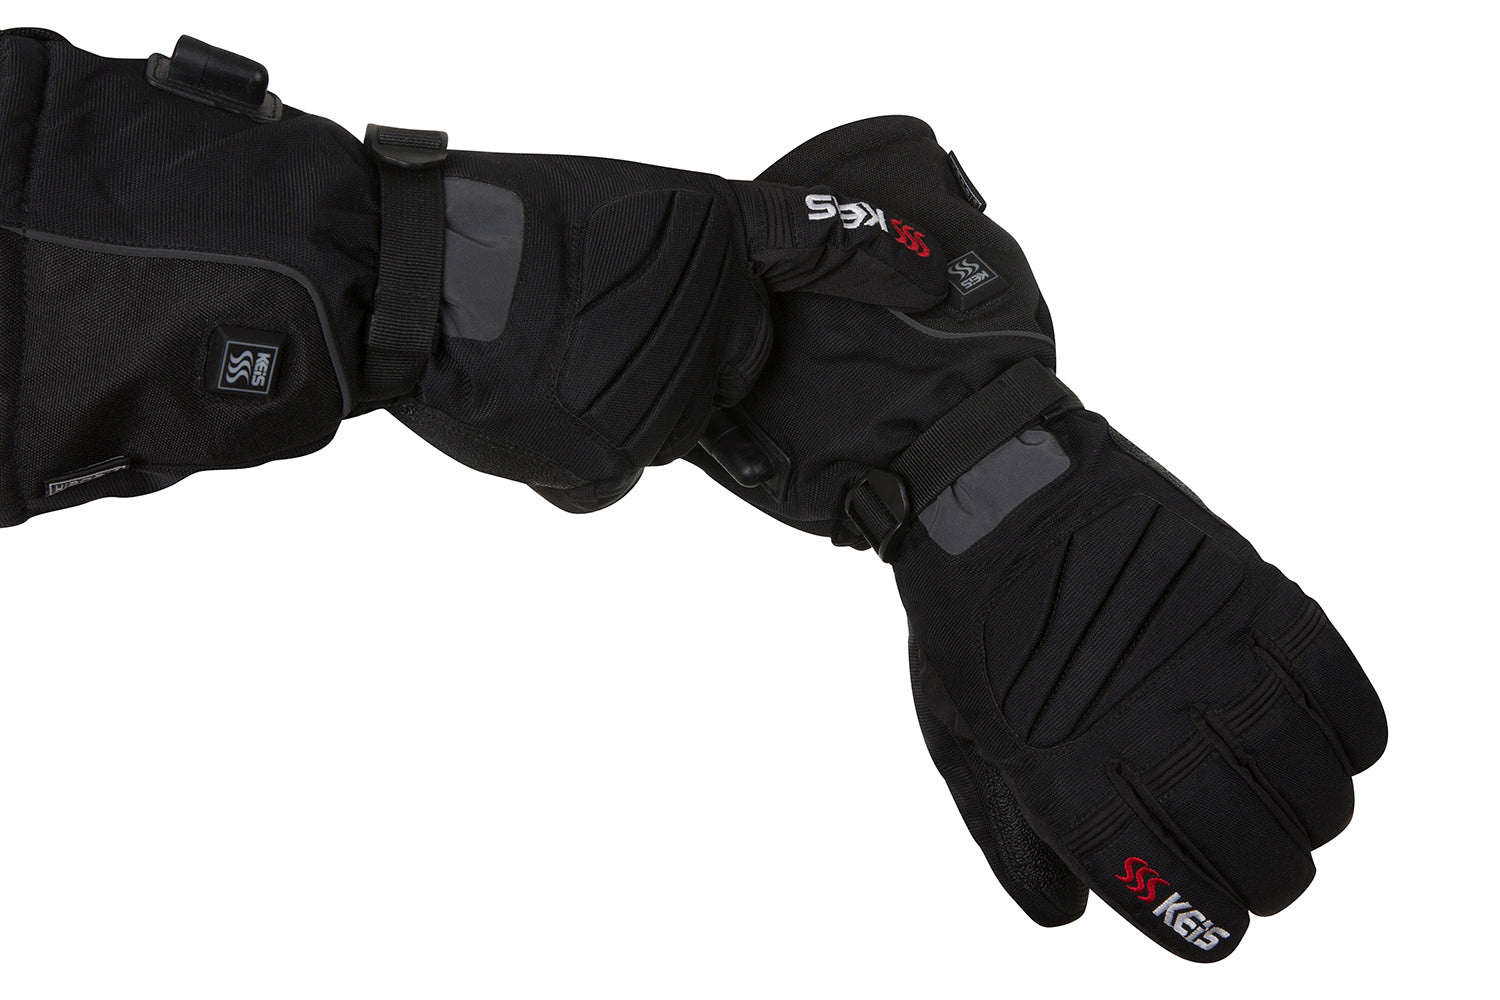 heated gloves with temperature control